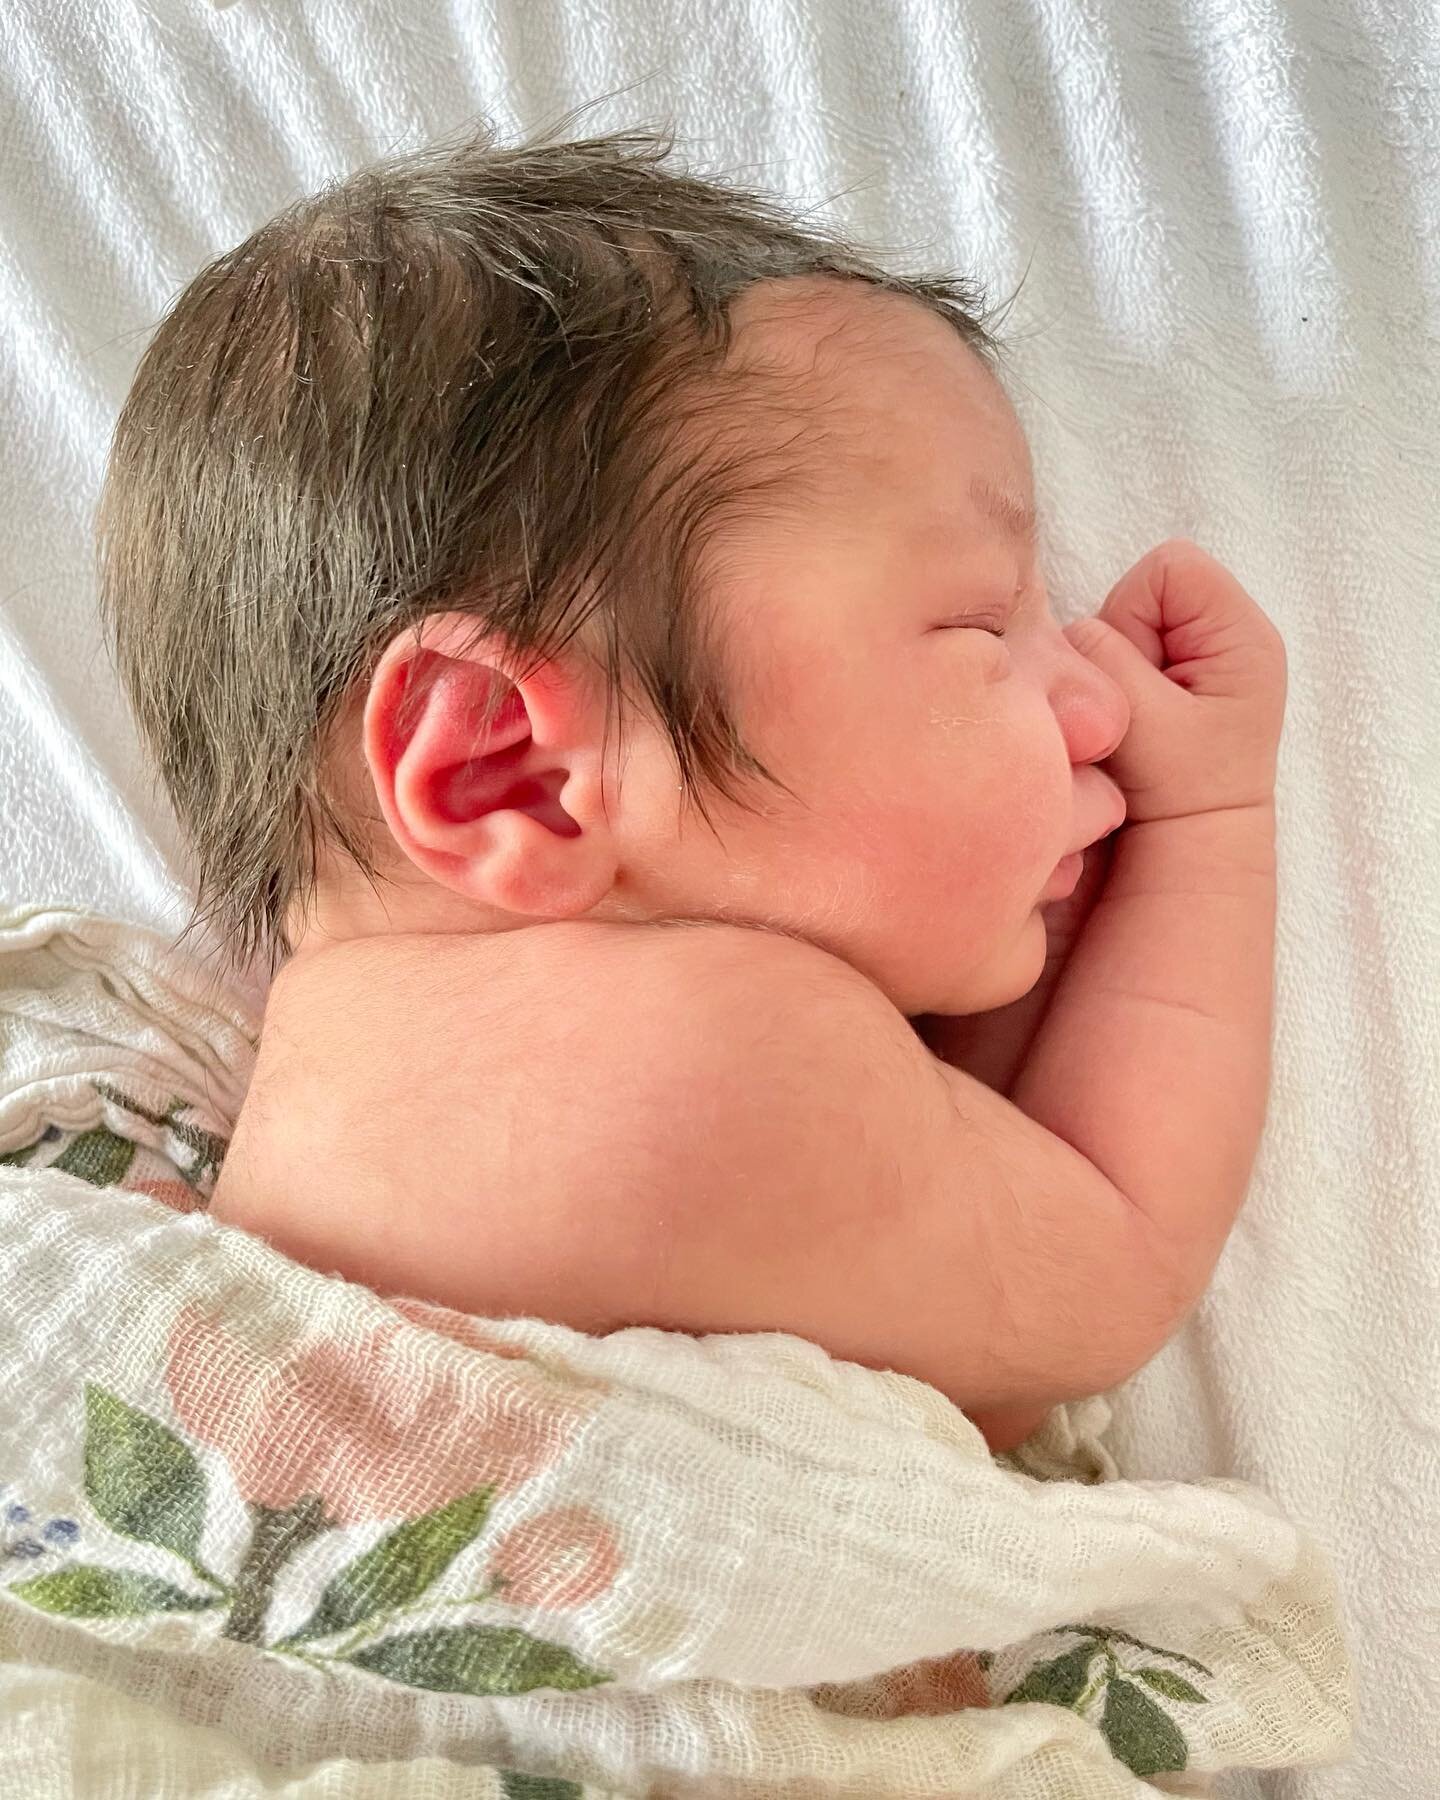 Welcome to the world Noa Lee Bateman! These pictures were taken during her first hours with us on May 3&mdash;she was born at home in a birth pool, ushered in by my loving husband, midwife and doula, and photos of all those who have supported me and 